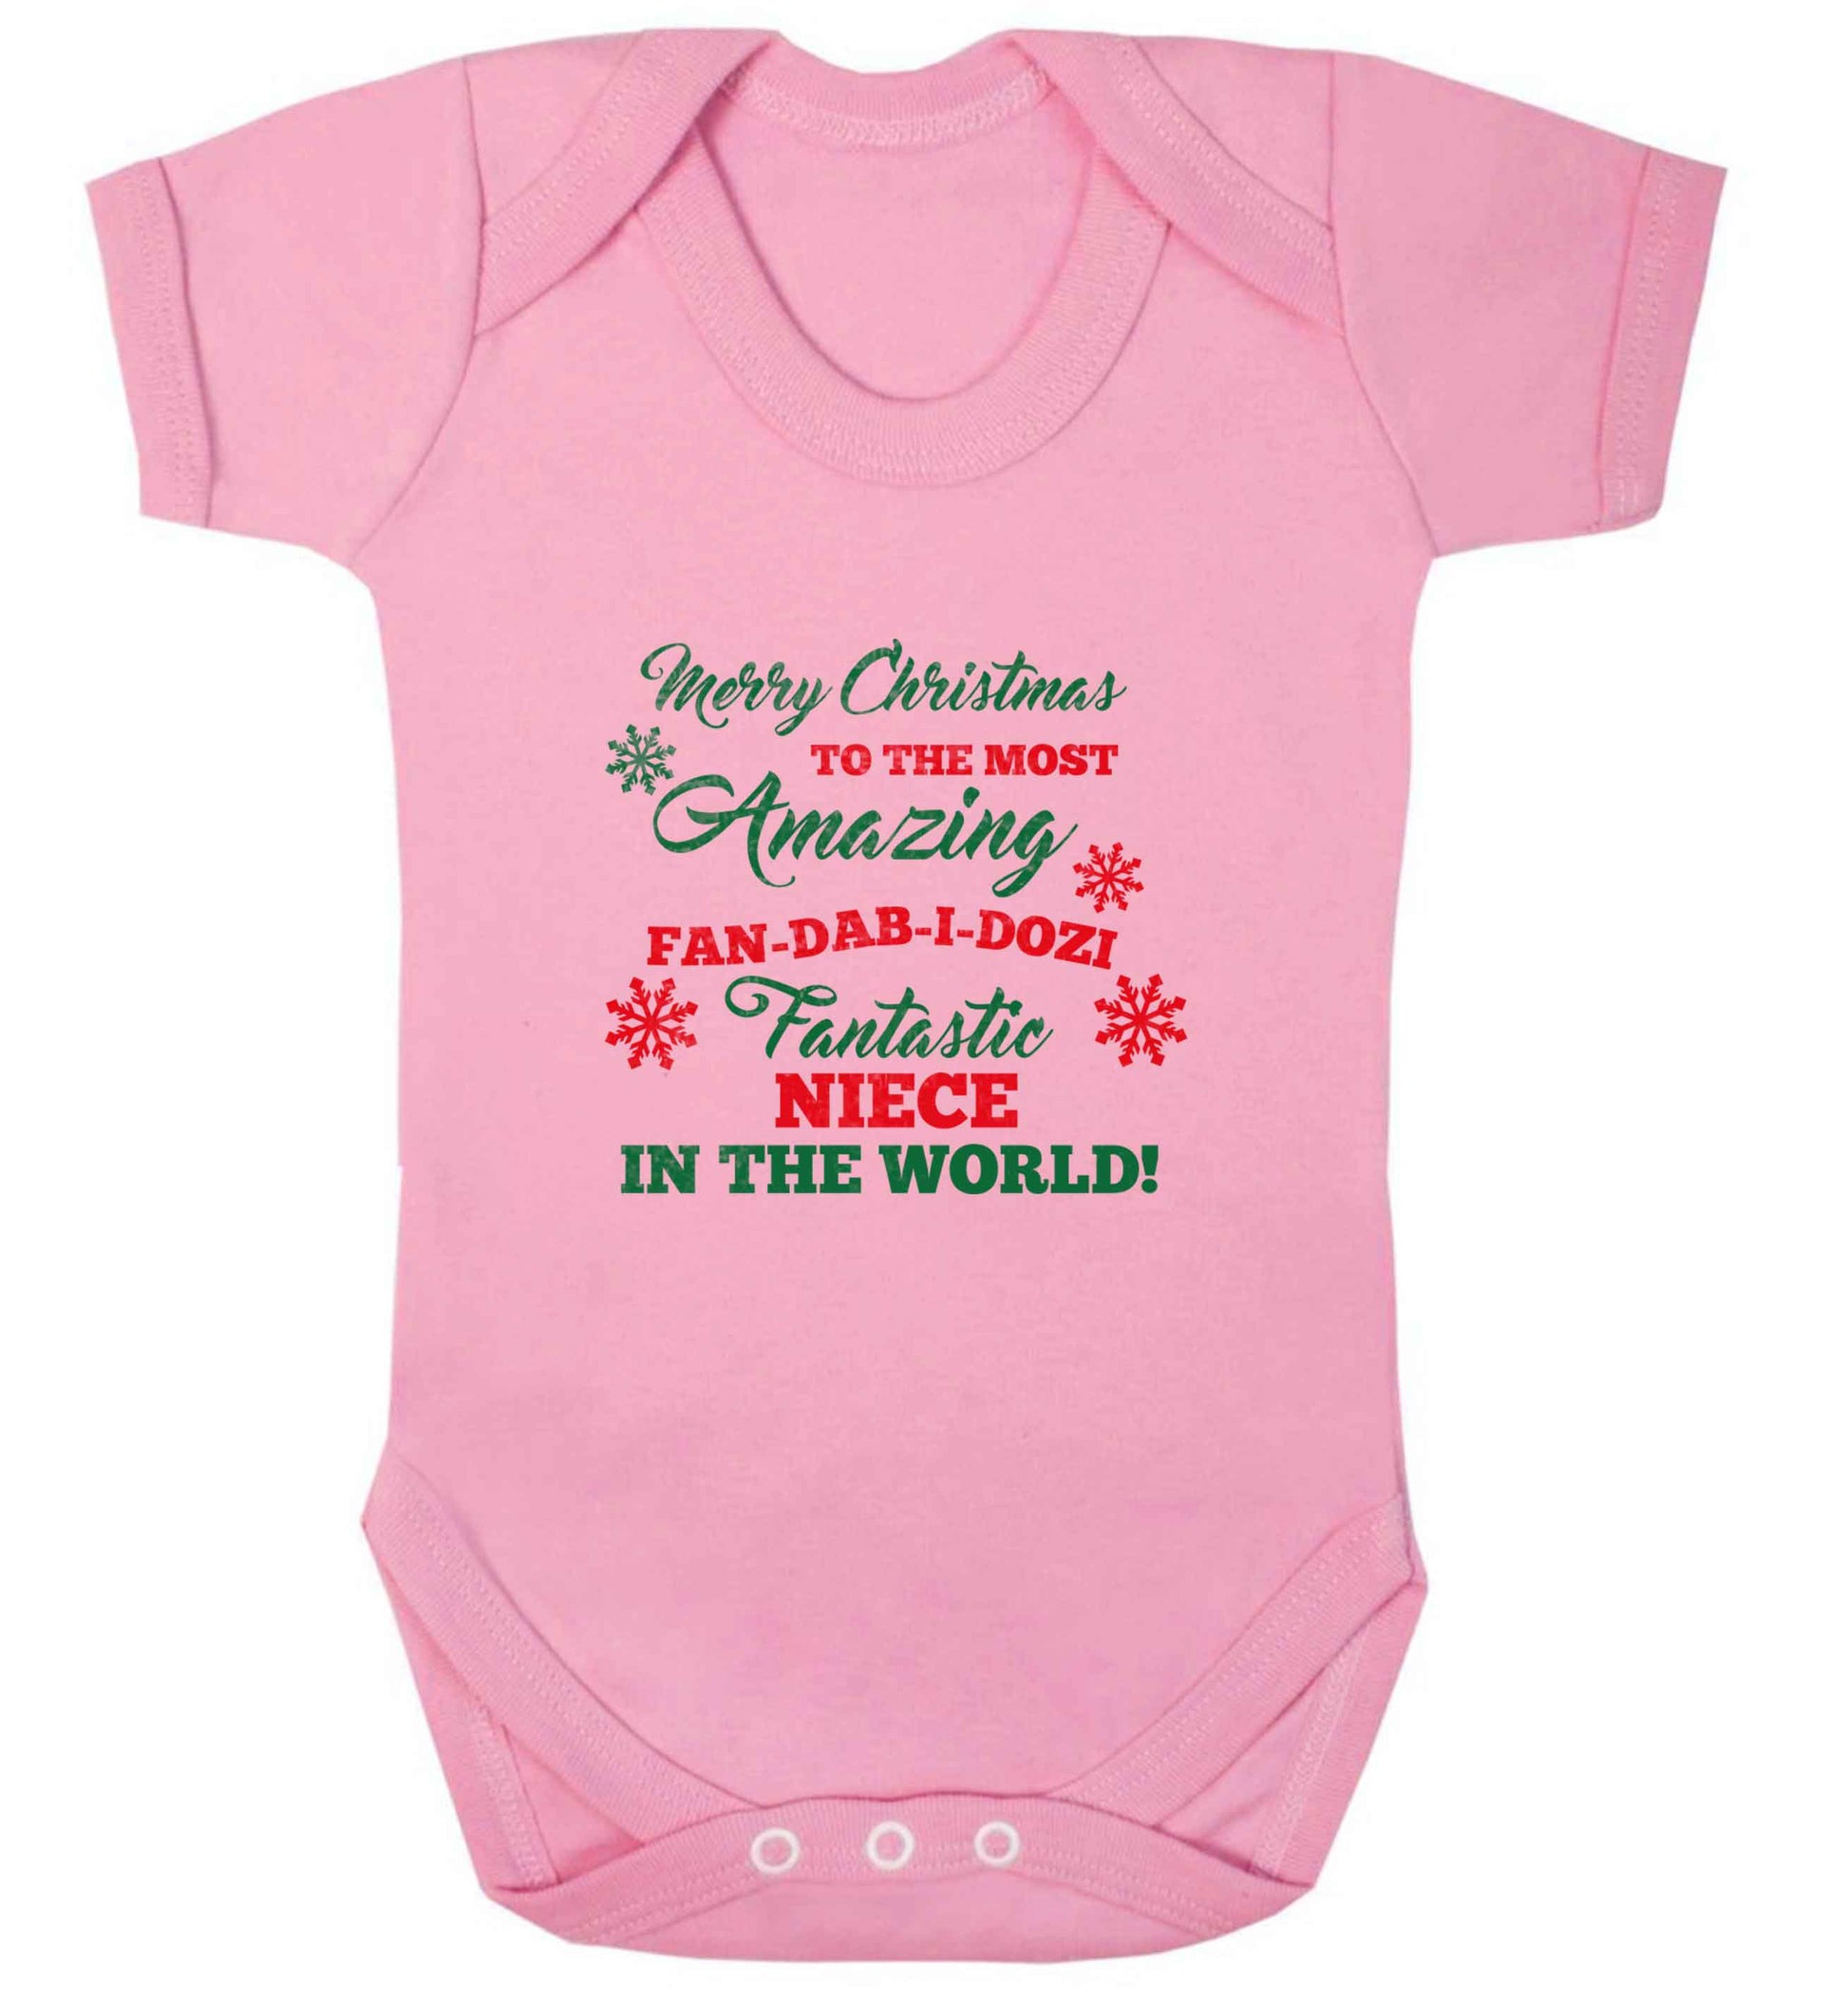 Merry Christmas to the most amazing fan-dab-i-dozi fantasic Niece in the world baby vest pale pink 18-24 months